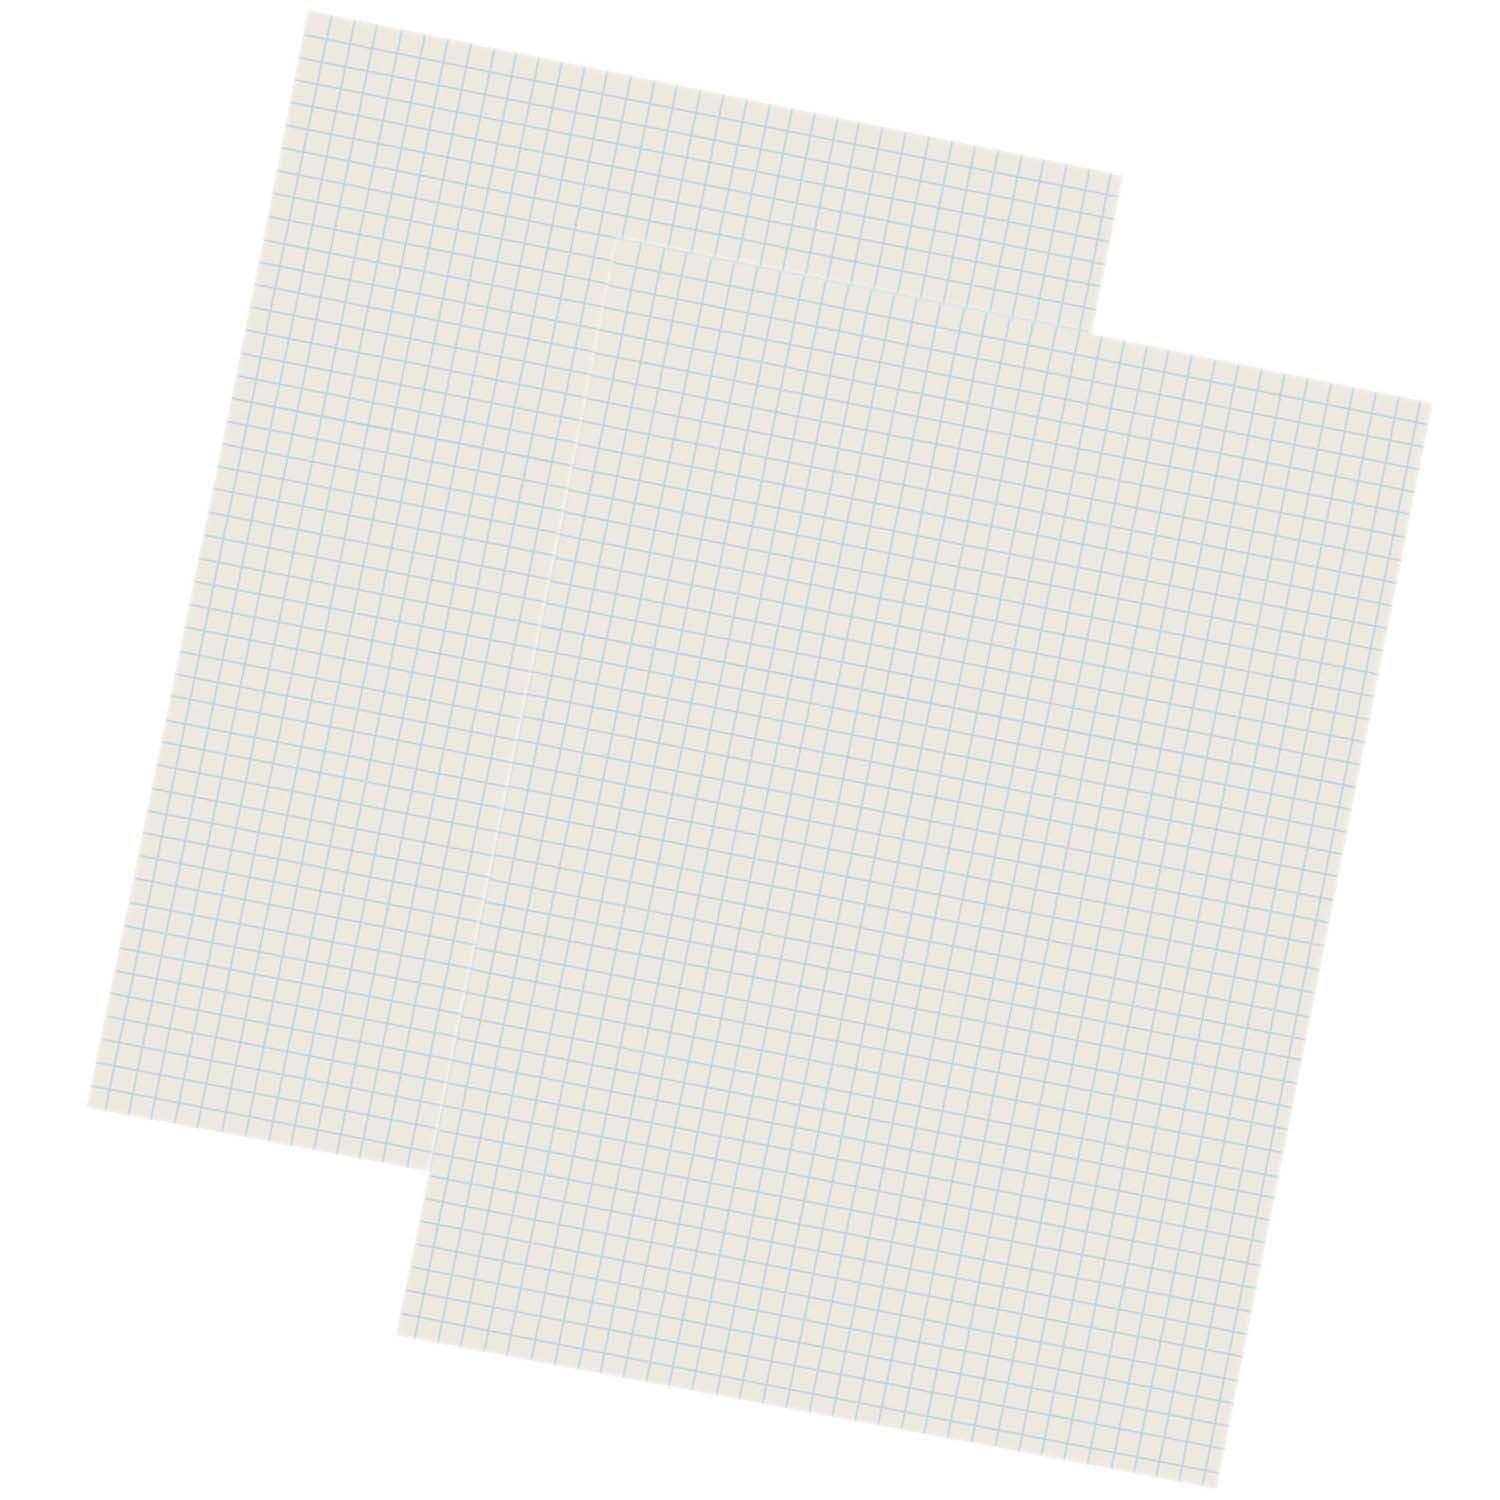 Grid Ruled Drawing Paper, White, 1/4" Quadrille Ruled, 9" x 12", 500 Sheets Per Pack, 2 Packs - Loomini